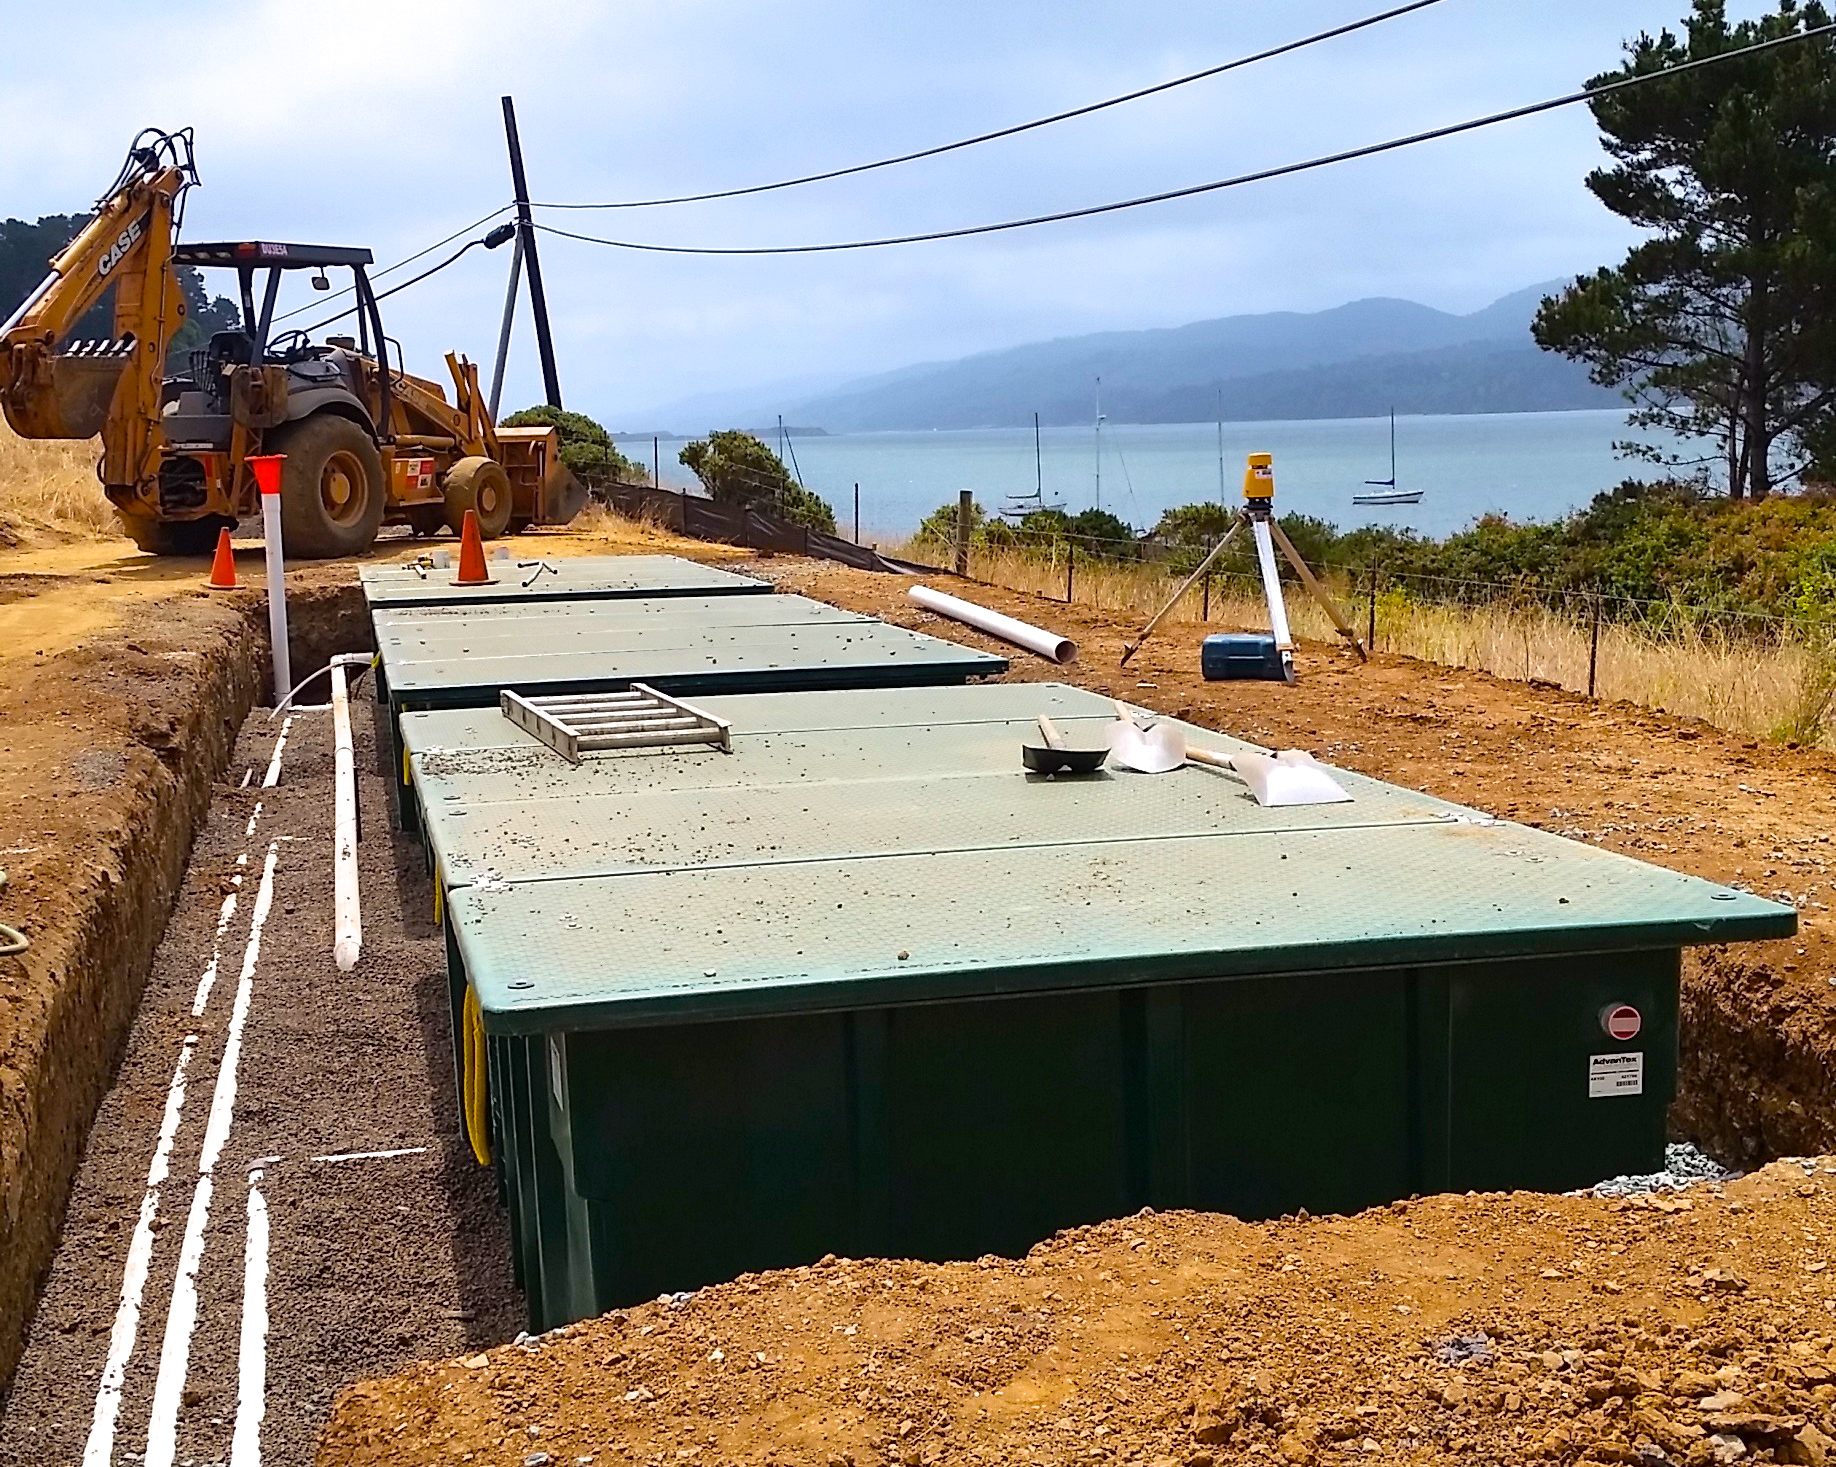 A new septic tank is installed near the shore of Tomales Bay.